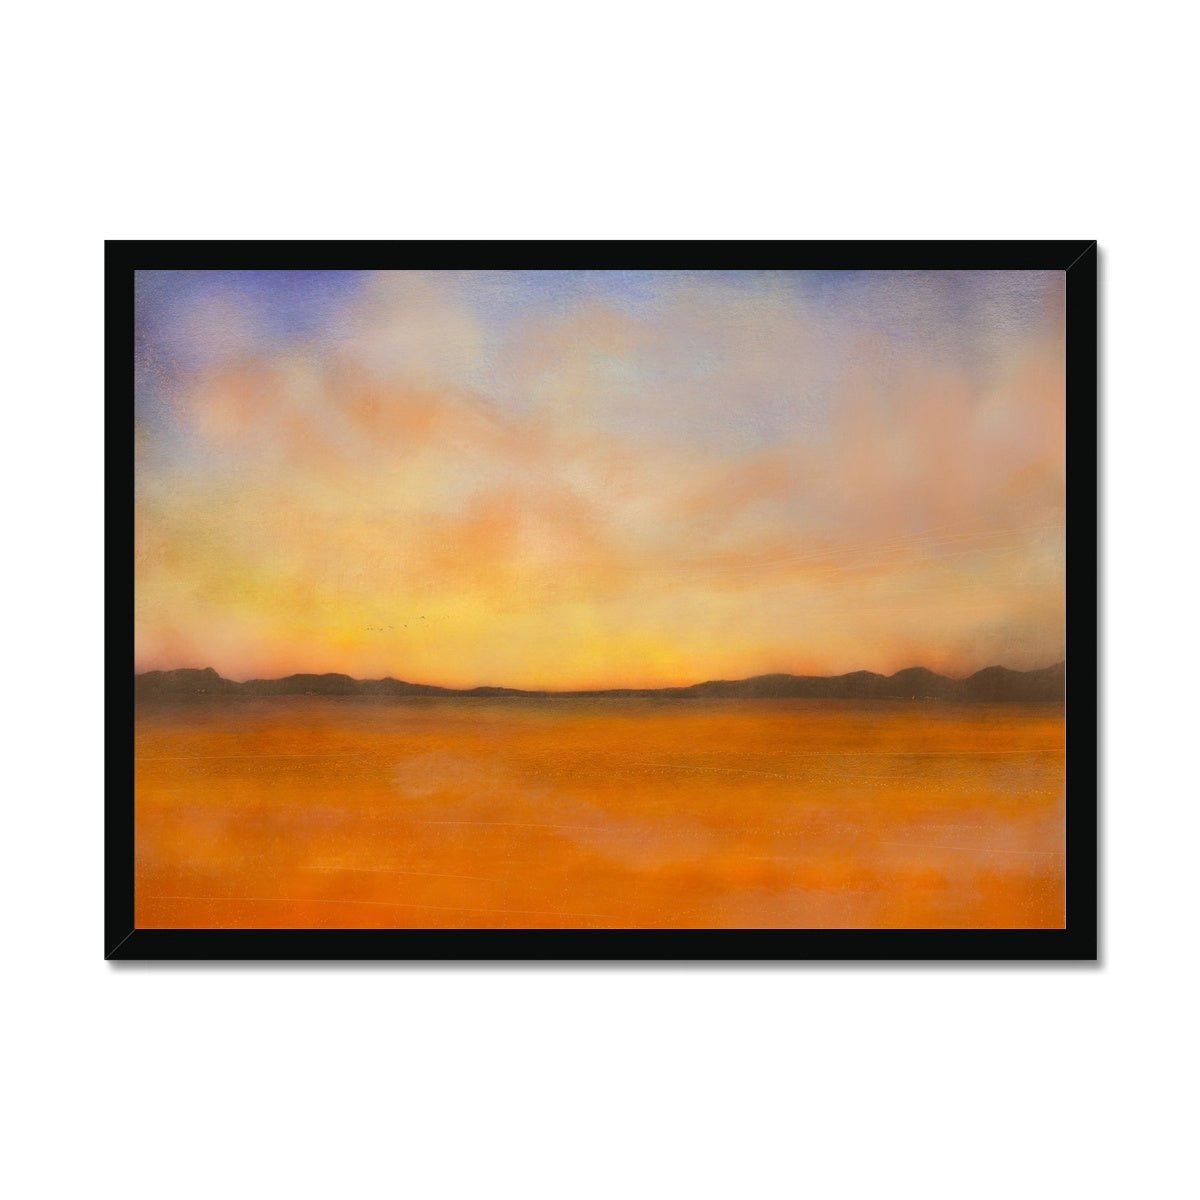 Islay Dawn Painting | Framed Prints From Scotland-Framed Prints-Hebridean Islands Art Gallery-A2 Landscape-Black Frame-Paintings, Prints, Homeware, Art Gifts From Scotland By Scottish Artist Kevin Hunter